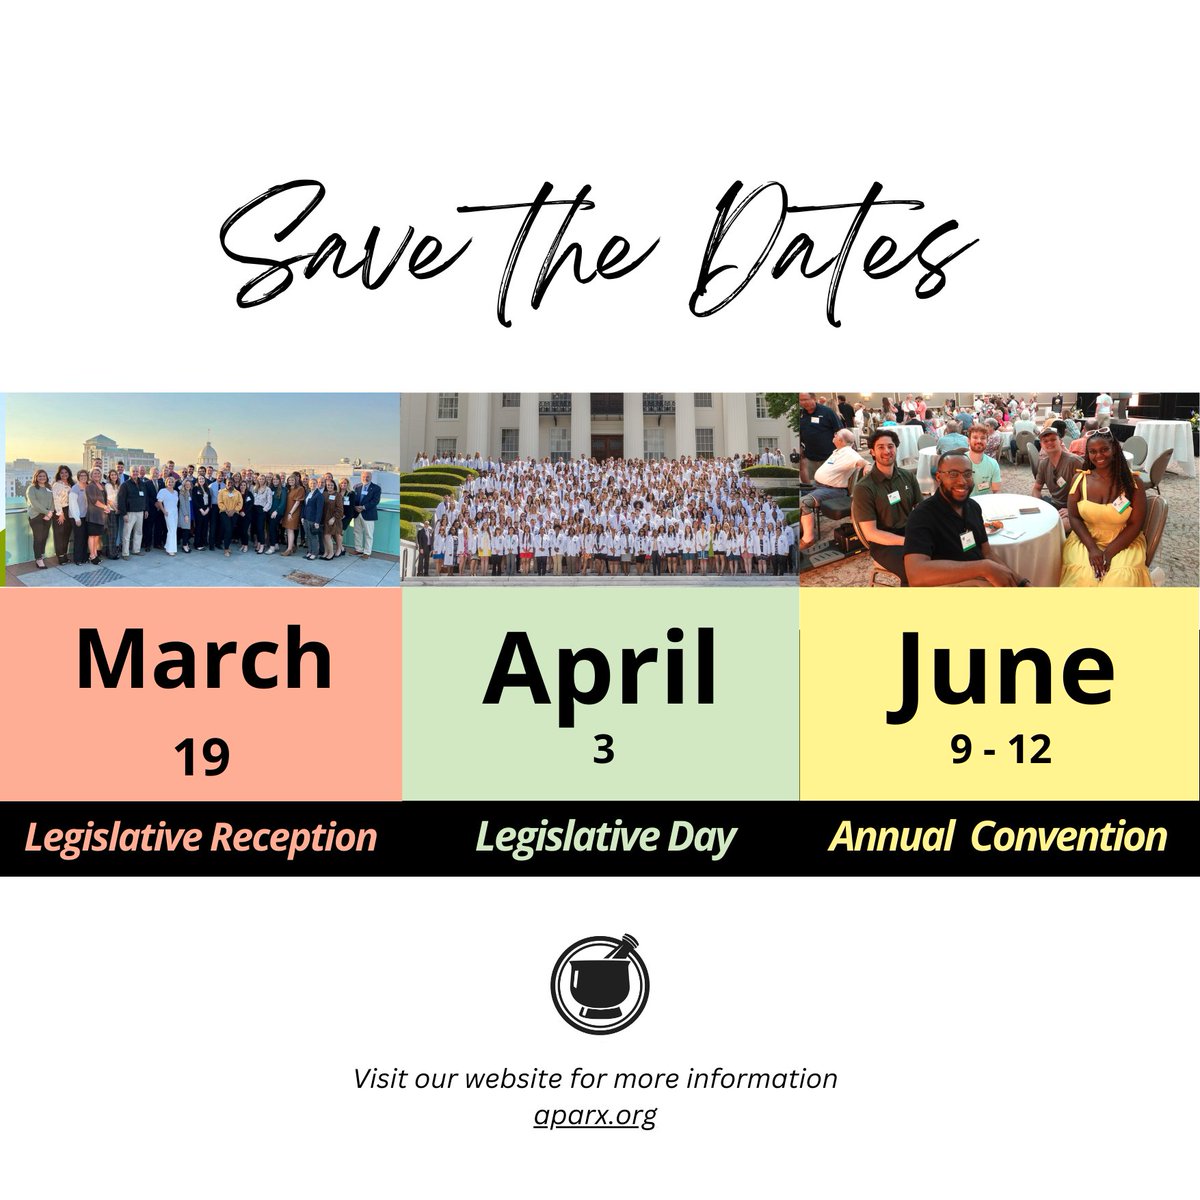 Mark your calendars for these important APA events! We’d love to see you there! For the legislative events, learn more and register here aparx.org/page/23 Registration for the Annual Convention will be made available in the coming months.